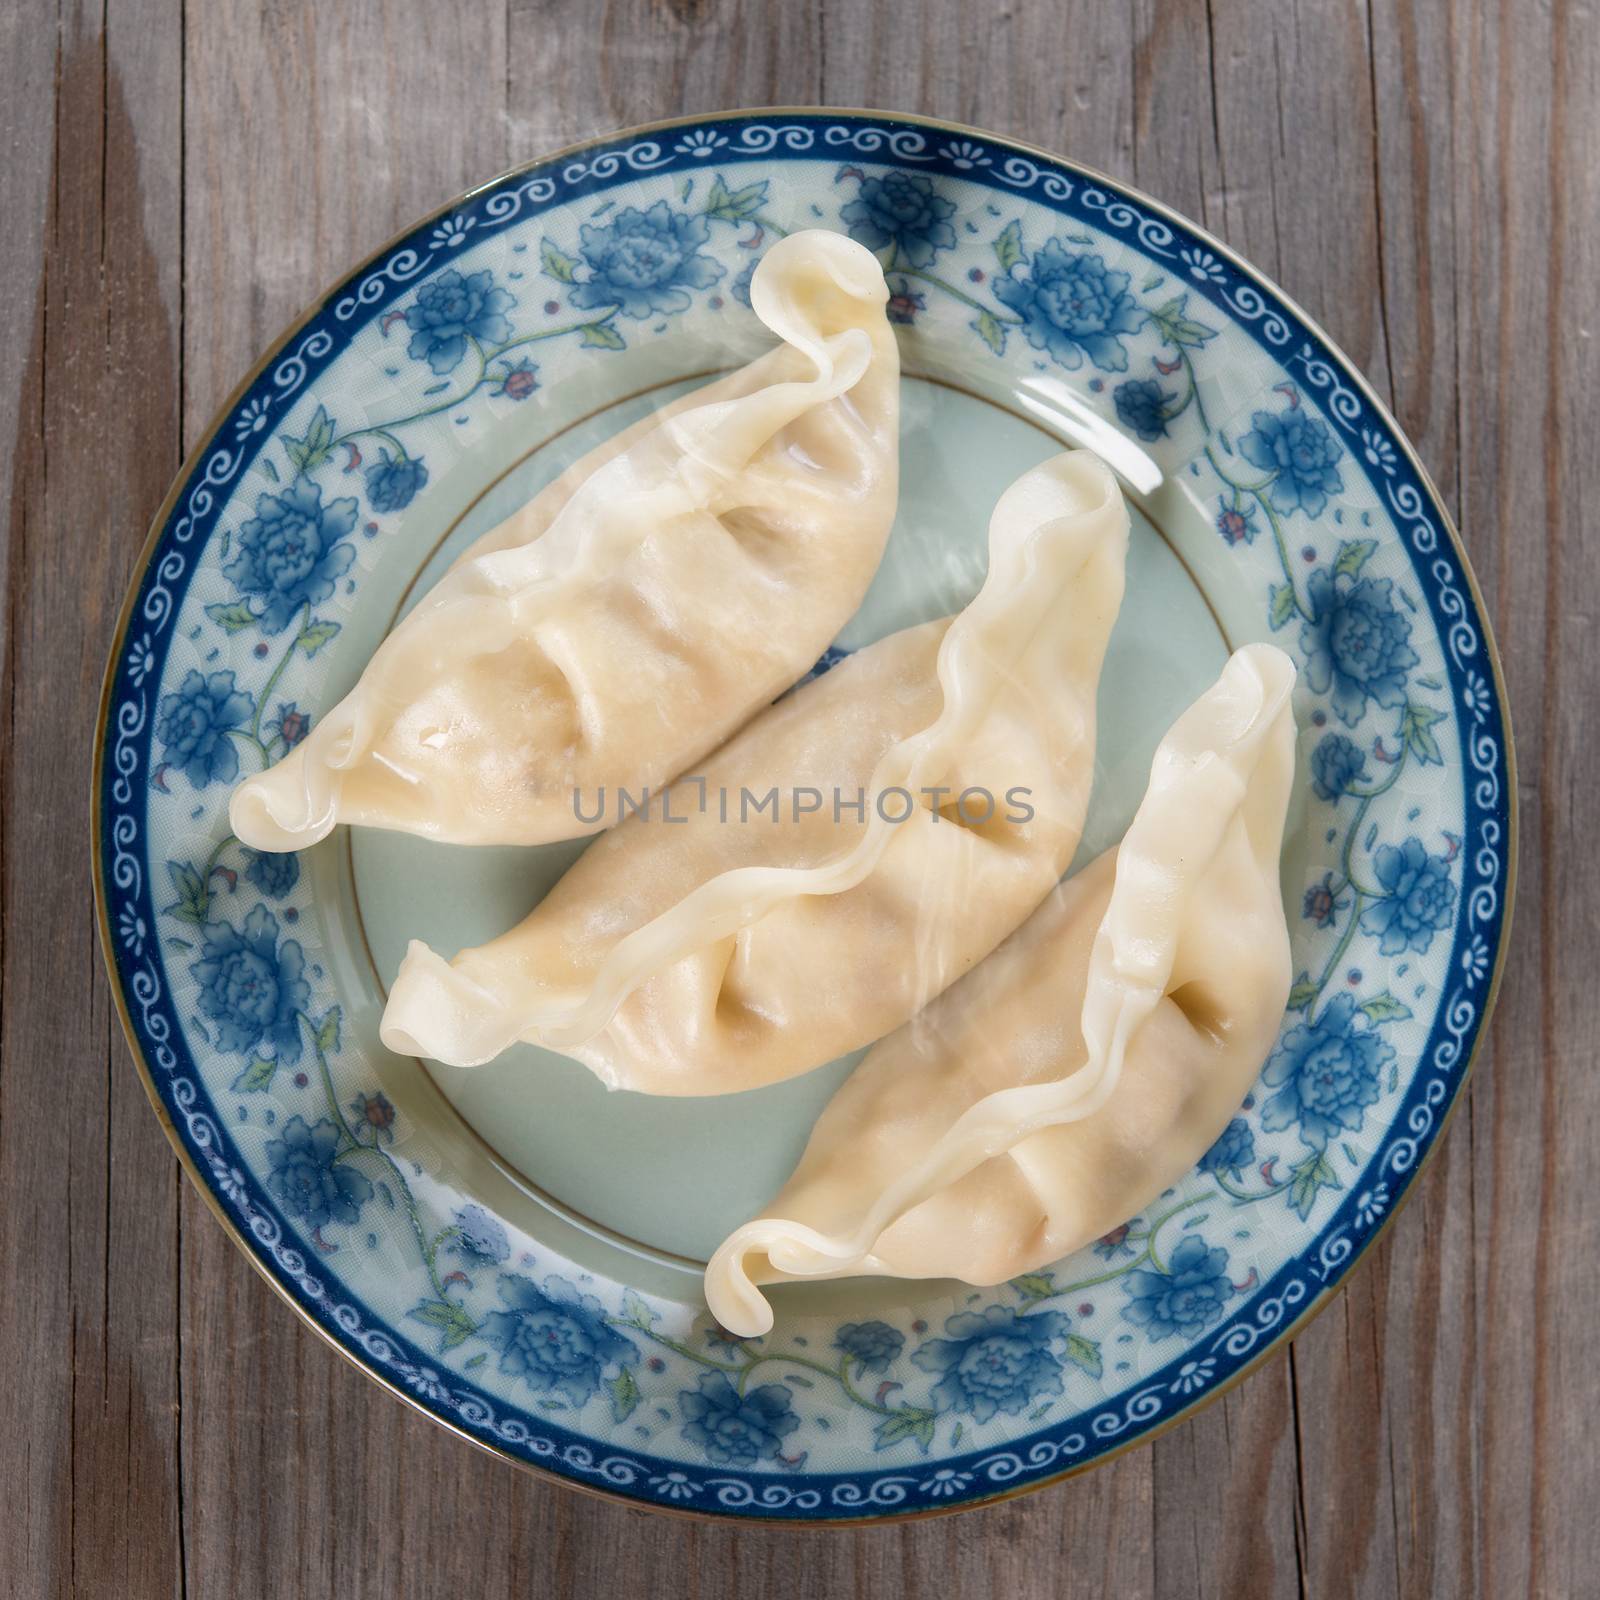 Top view fresh dumpling on plate. Chinese cuisine on vintage wooden background. Fractal on the plate is generic print.